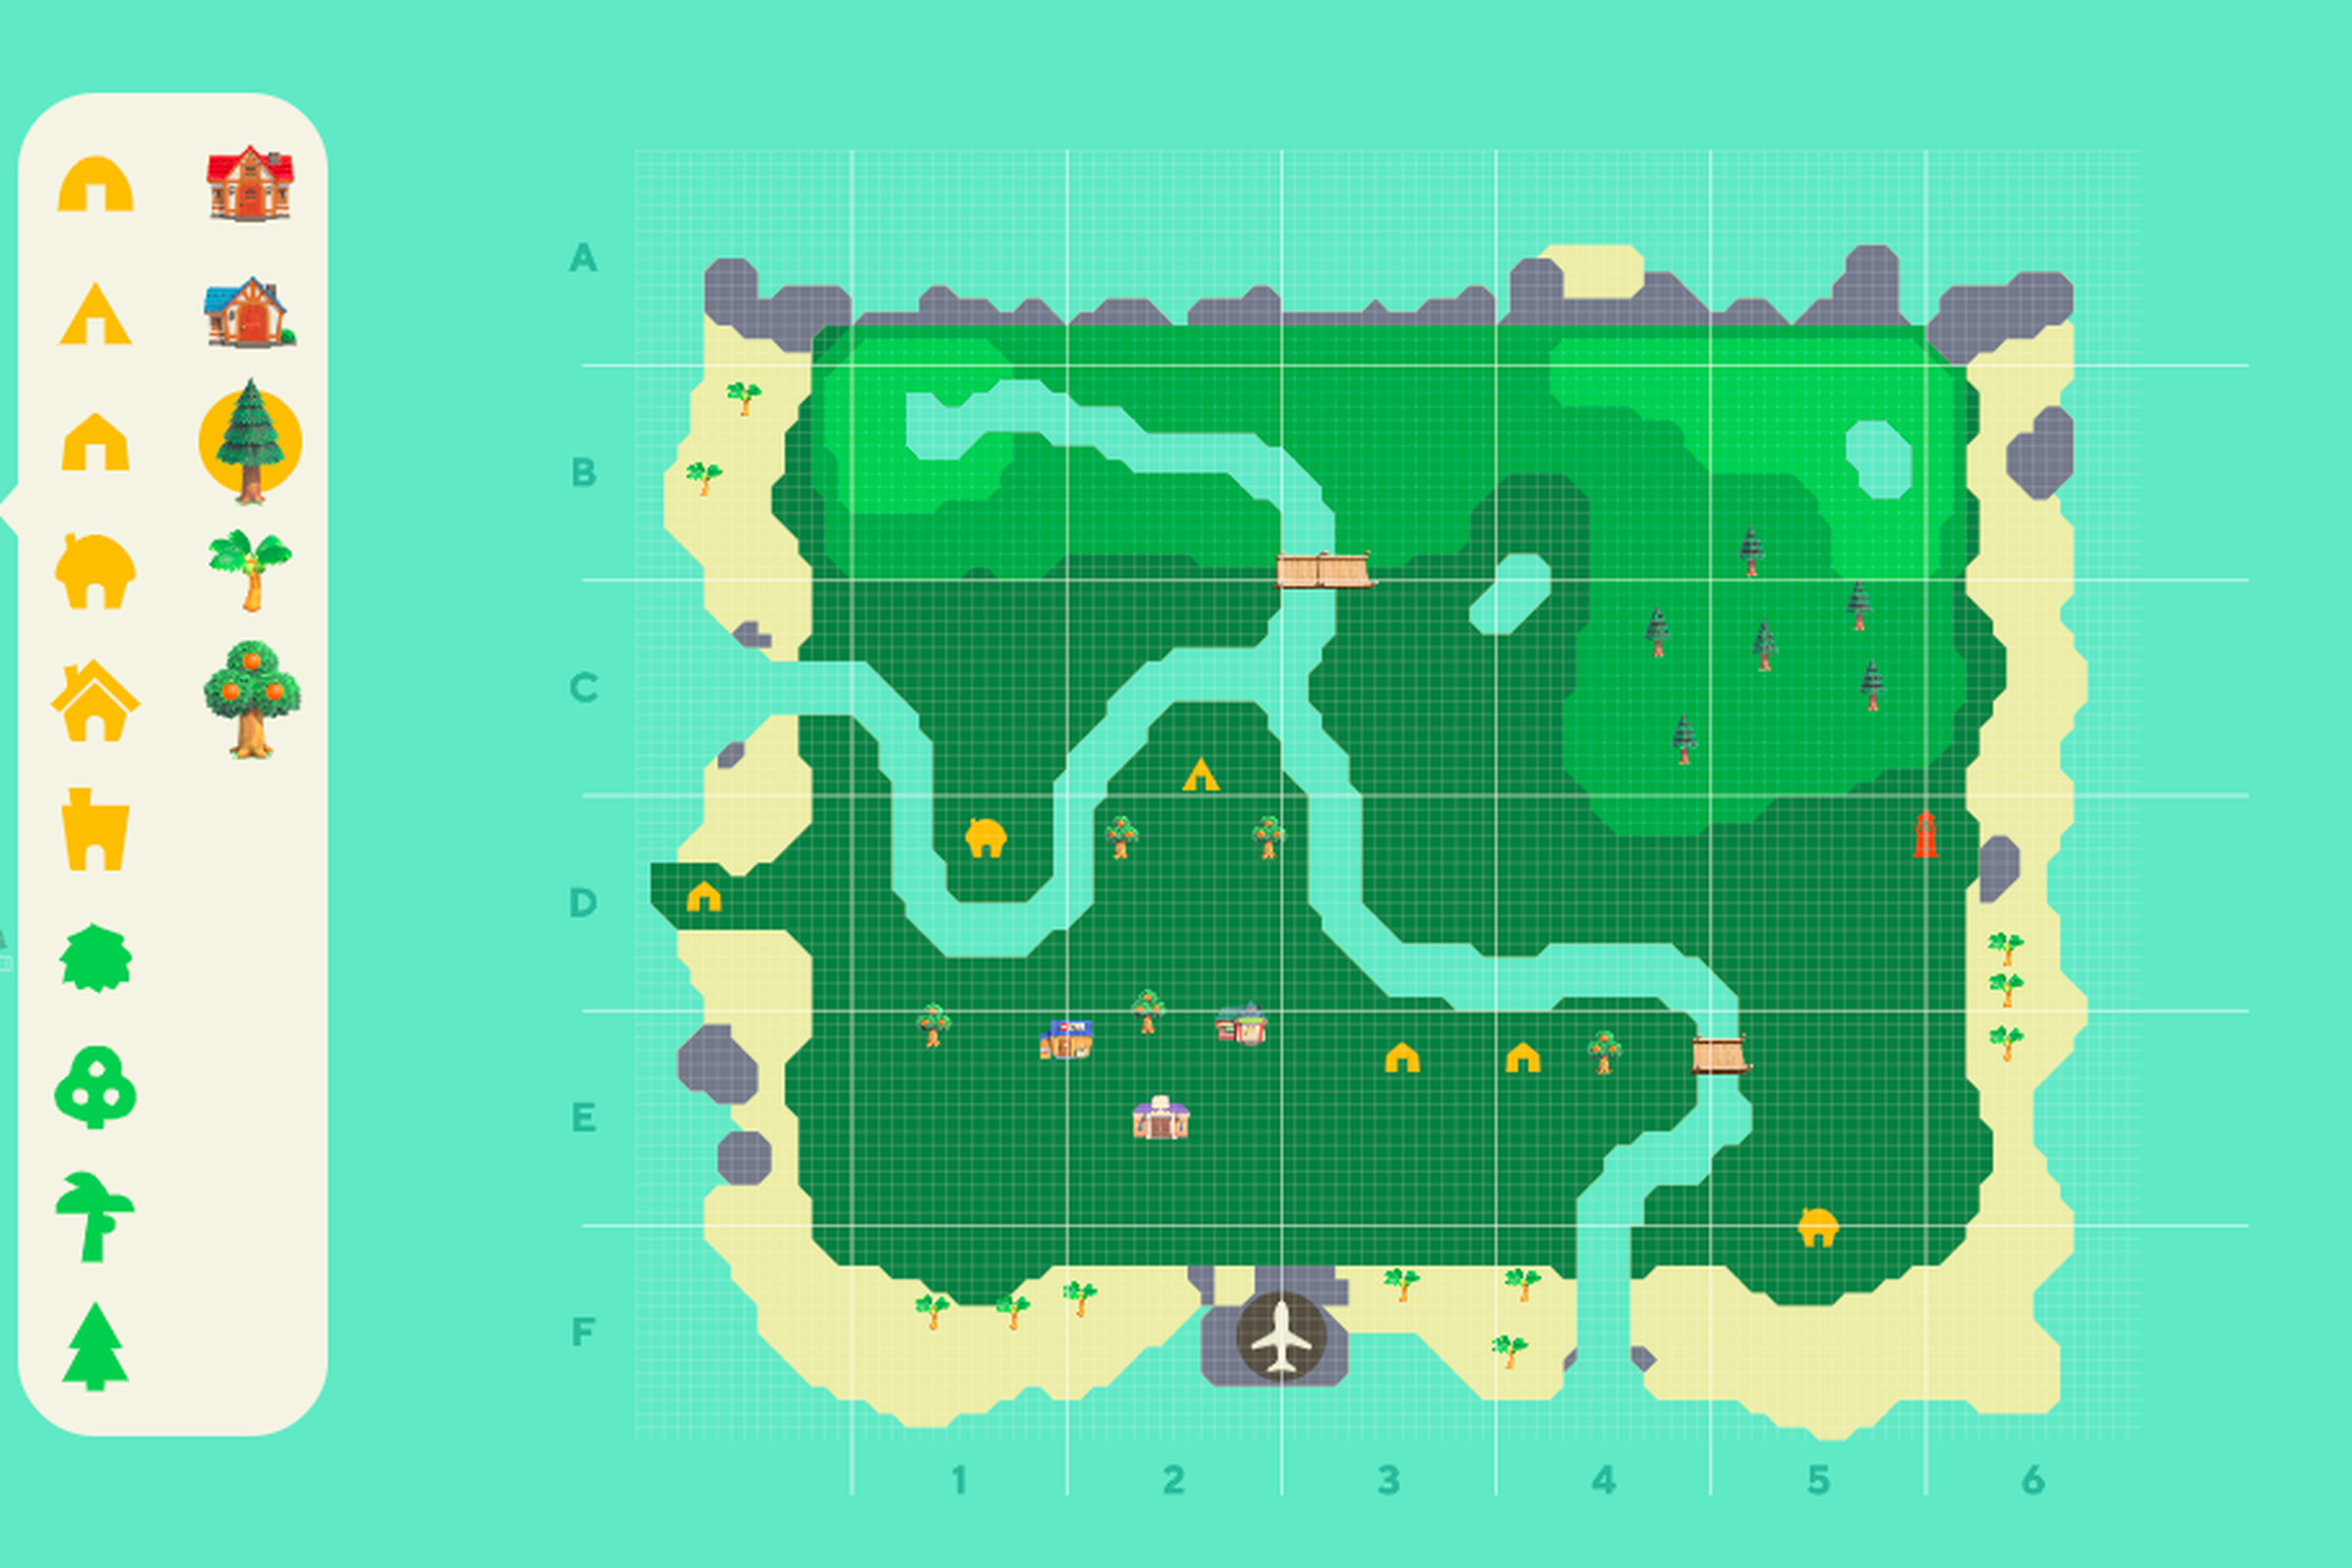 Start planning your Animal Crossing New Horizons island with this fan